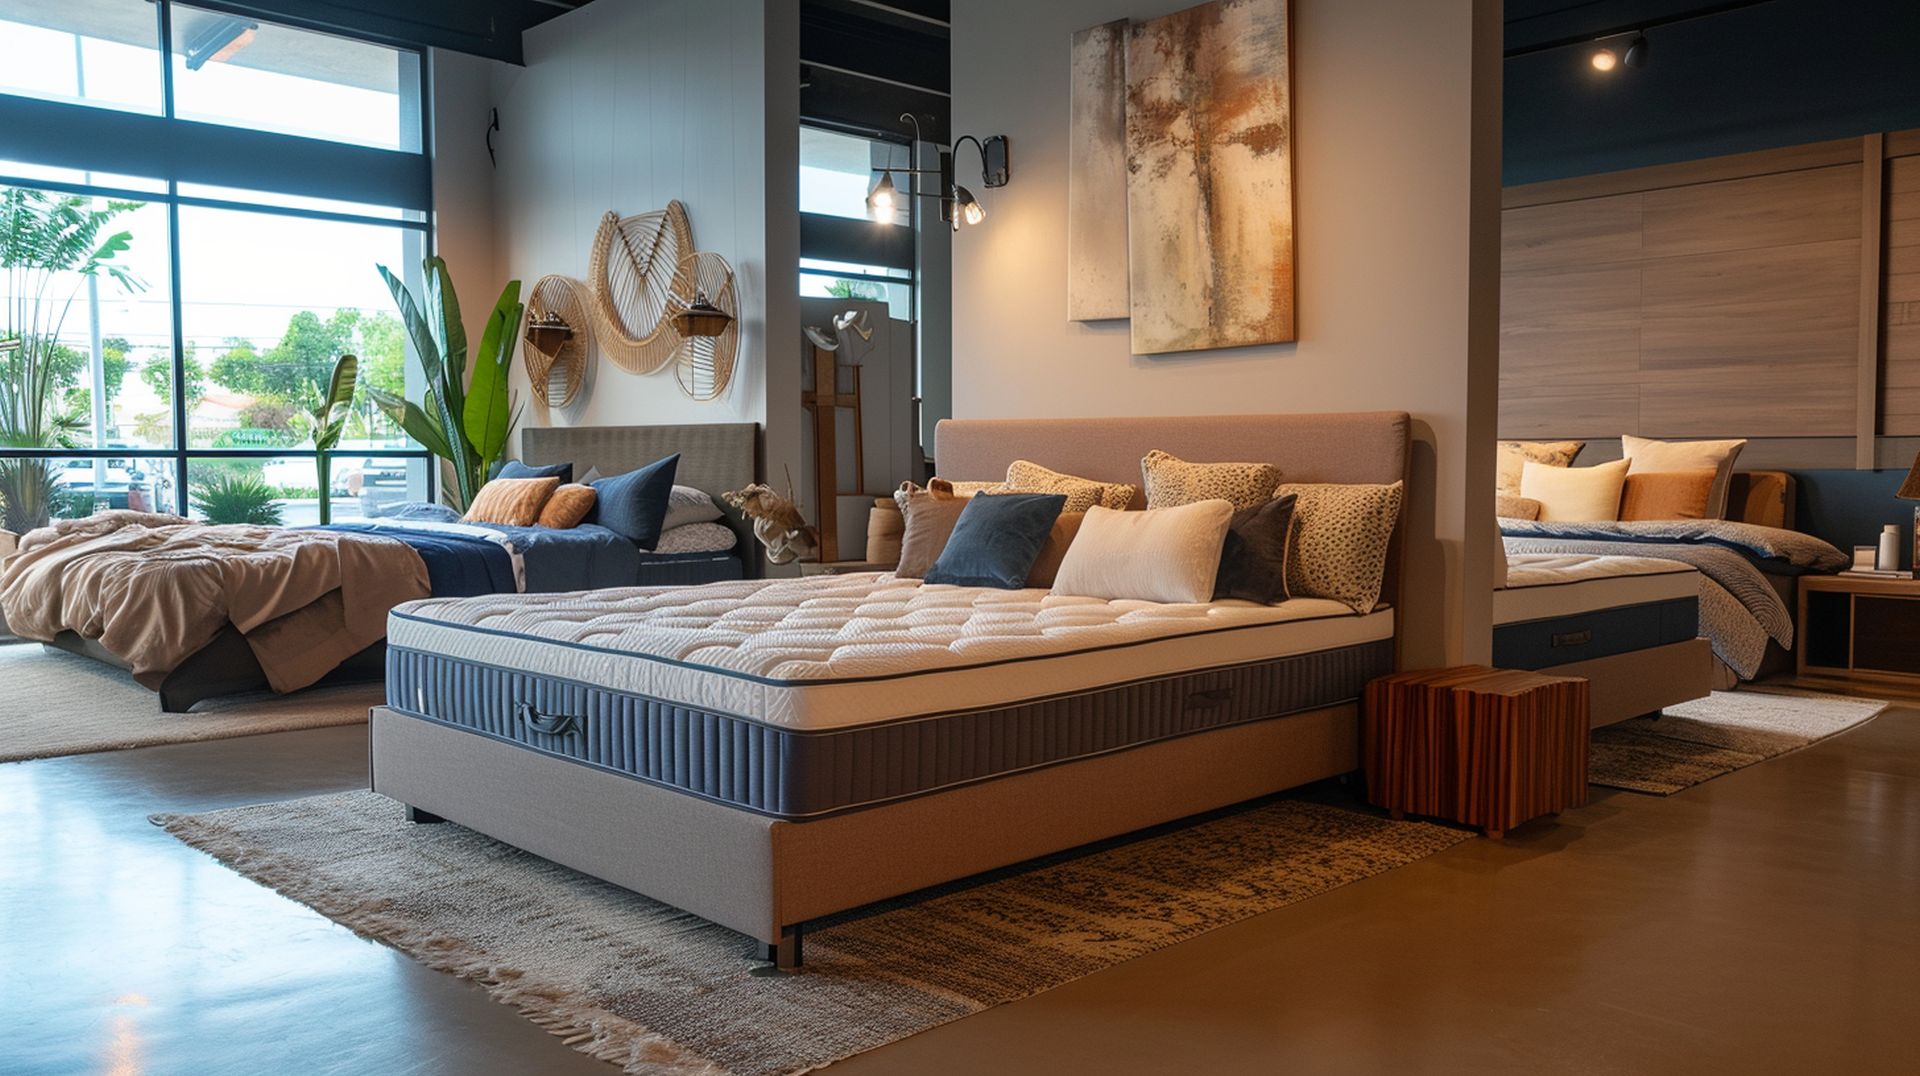 If you're looking for a new bed, mattress stores in Perris offer the best customer and delivery service, financing, and warranties in California